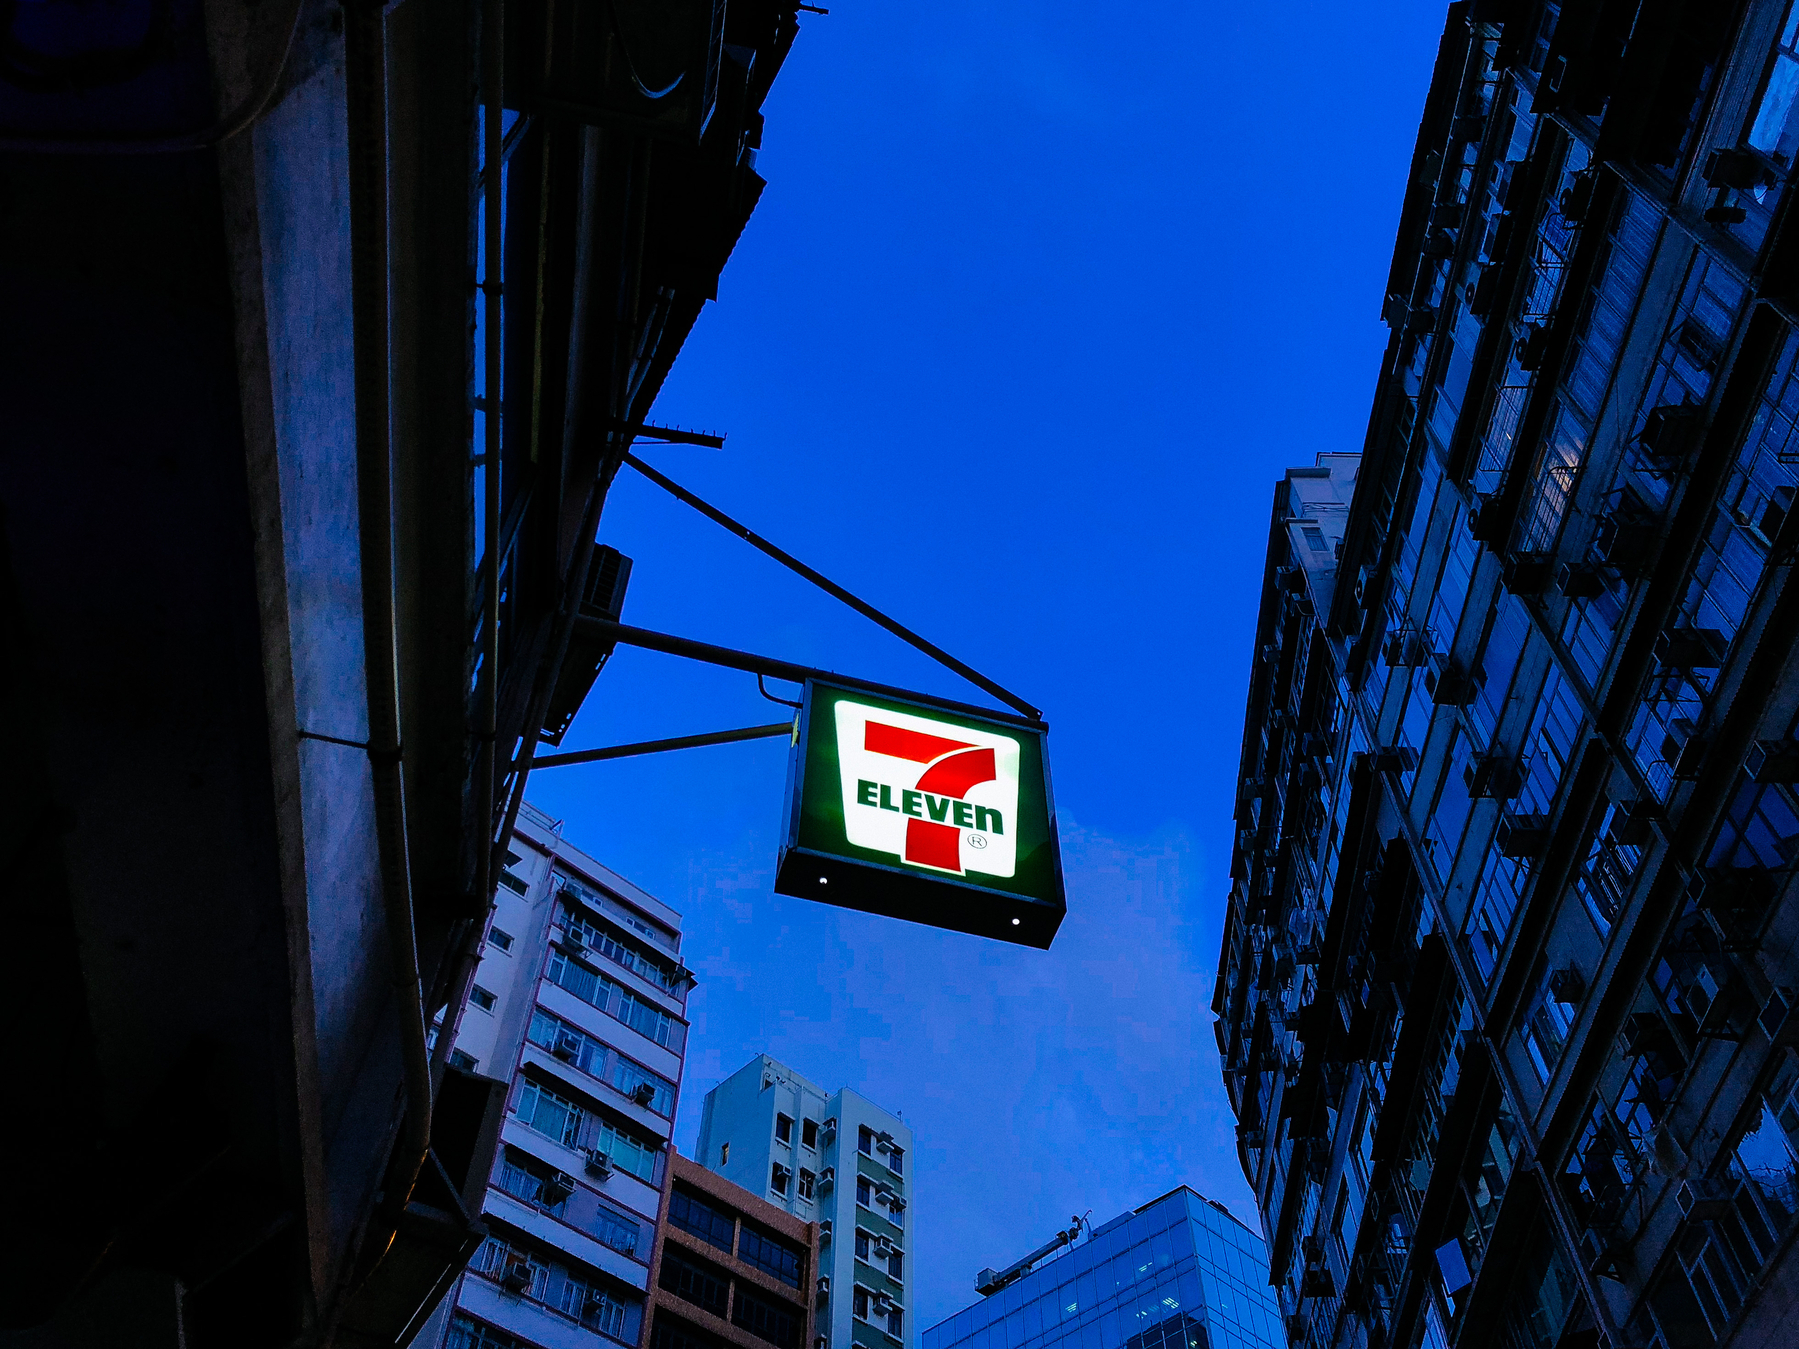 looking up to a 7-Eleven sign with a dusk sky above, in blue tones